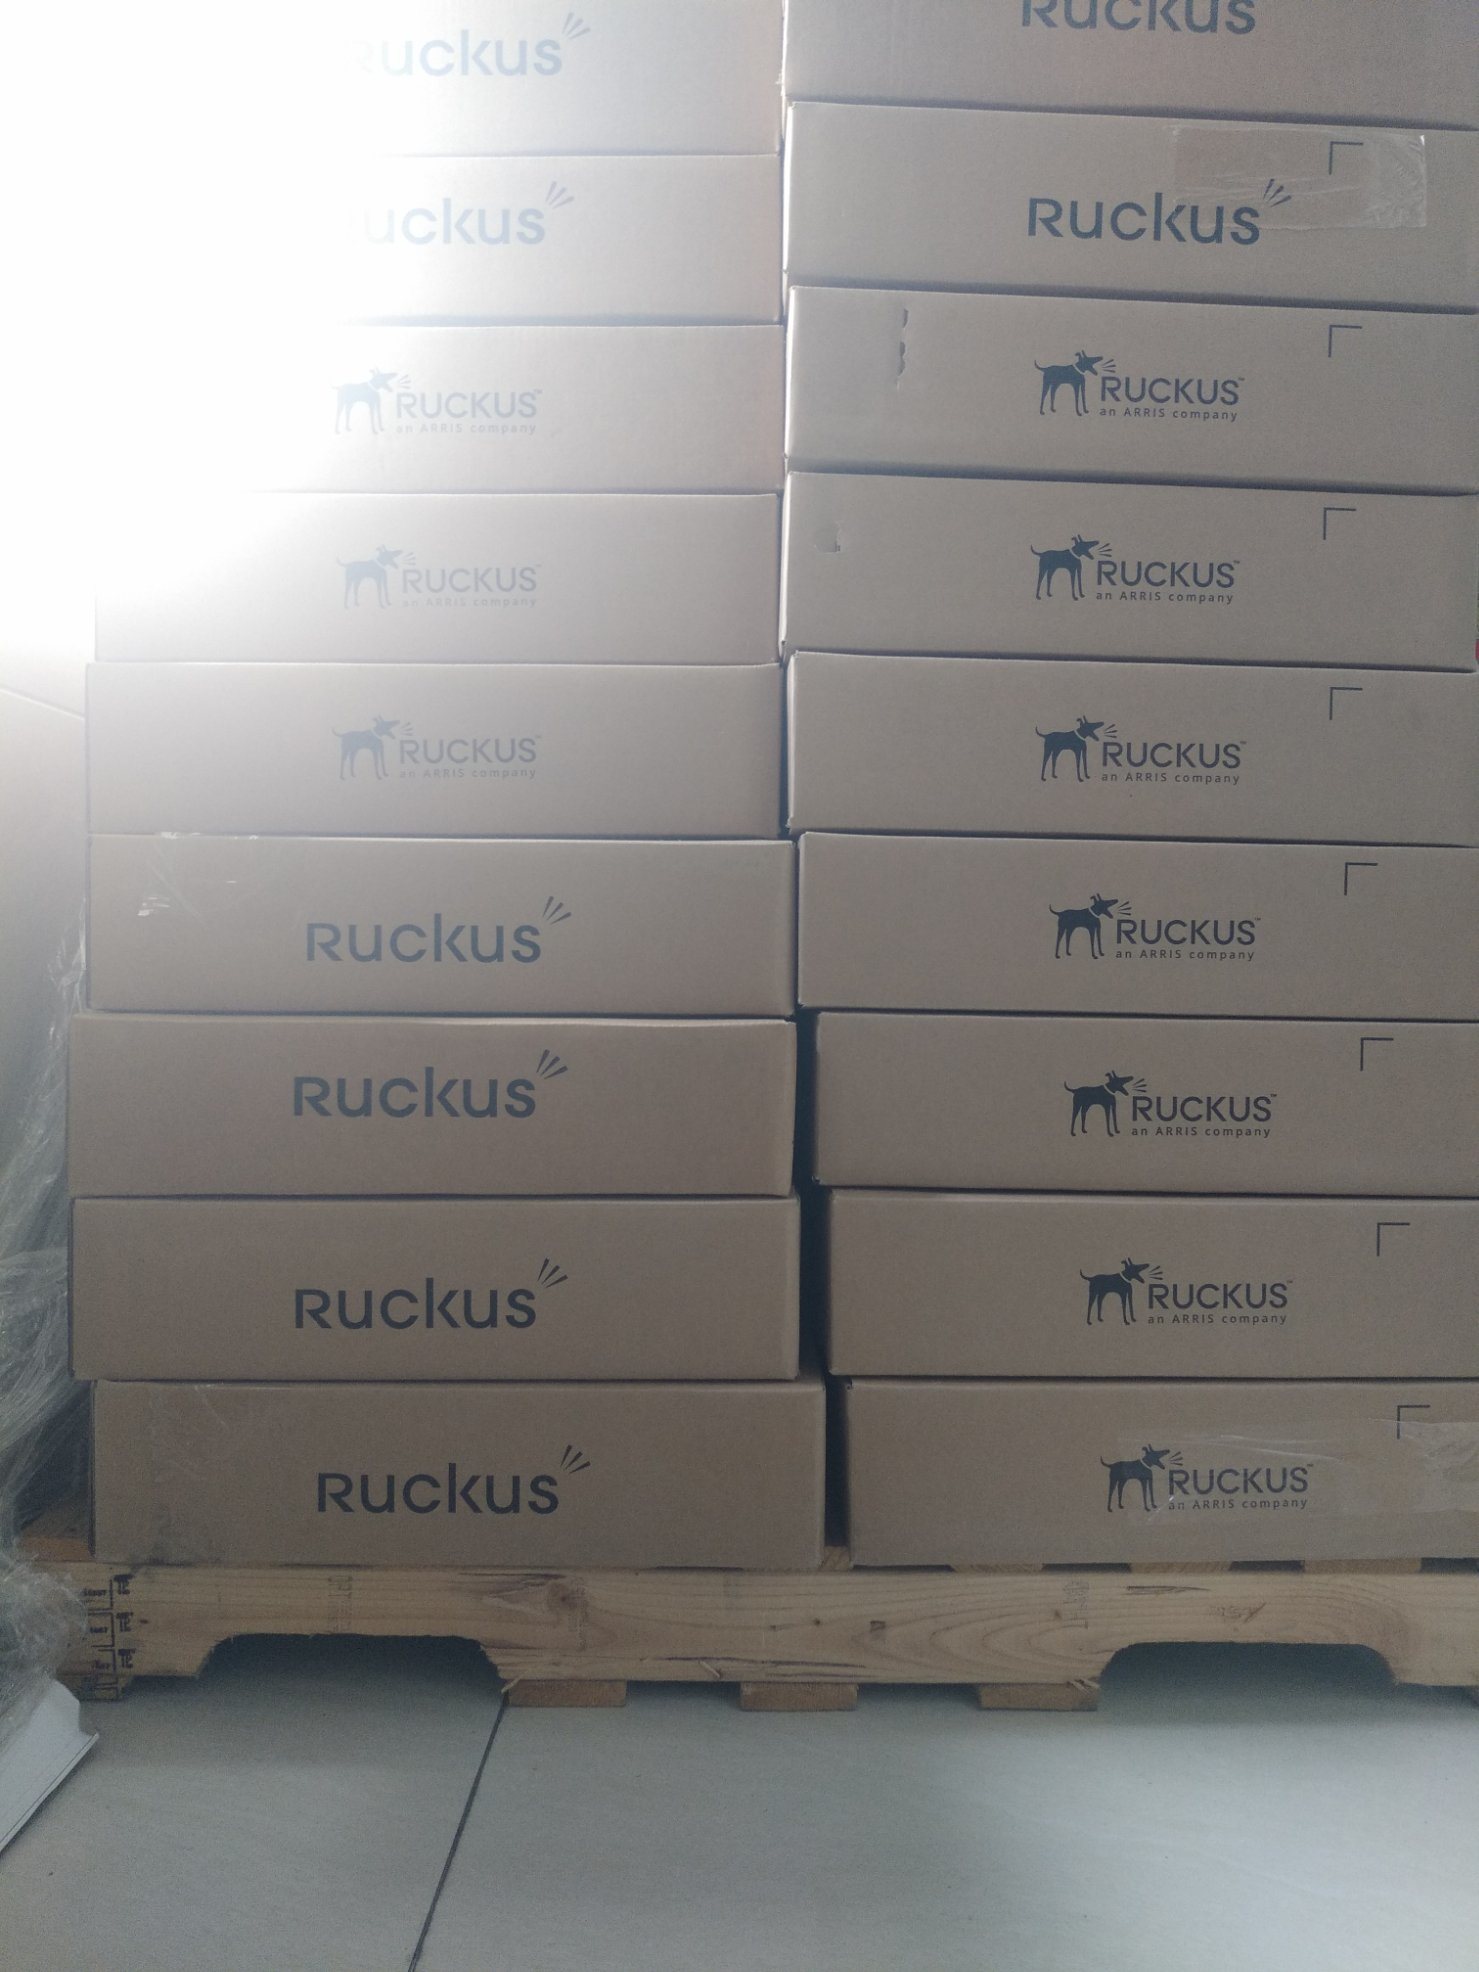 Ruckus ICX Switches ICX 7150 24-Port Compact Switch with 1 GBE Uplinks ICX7150-24-4X1G